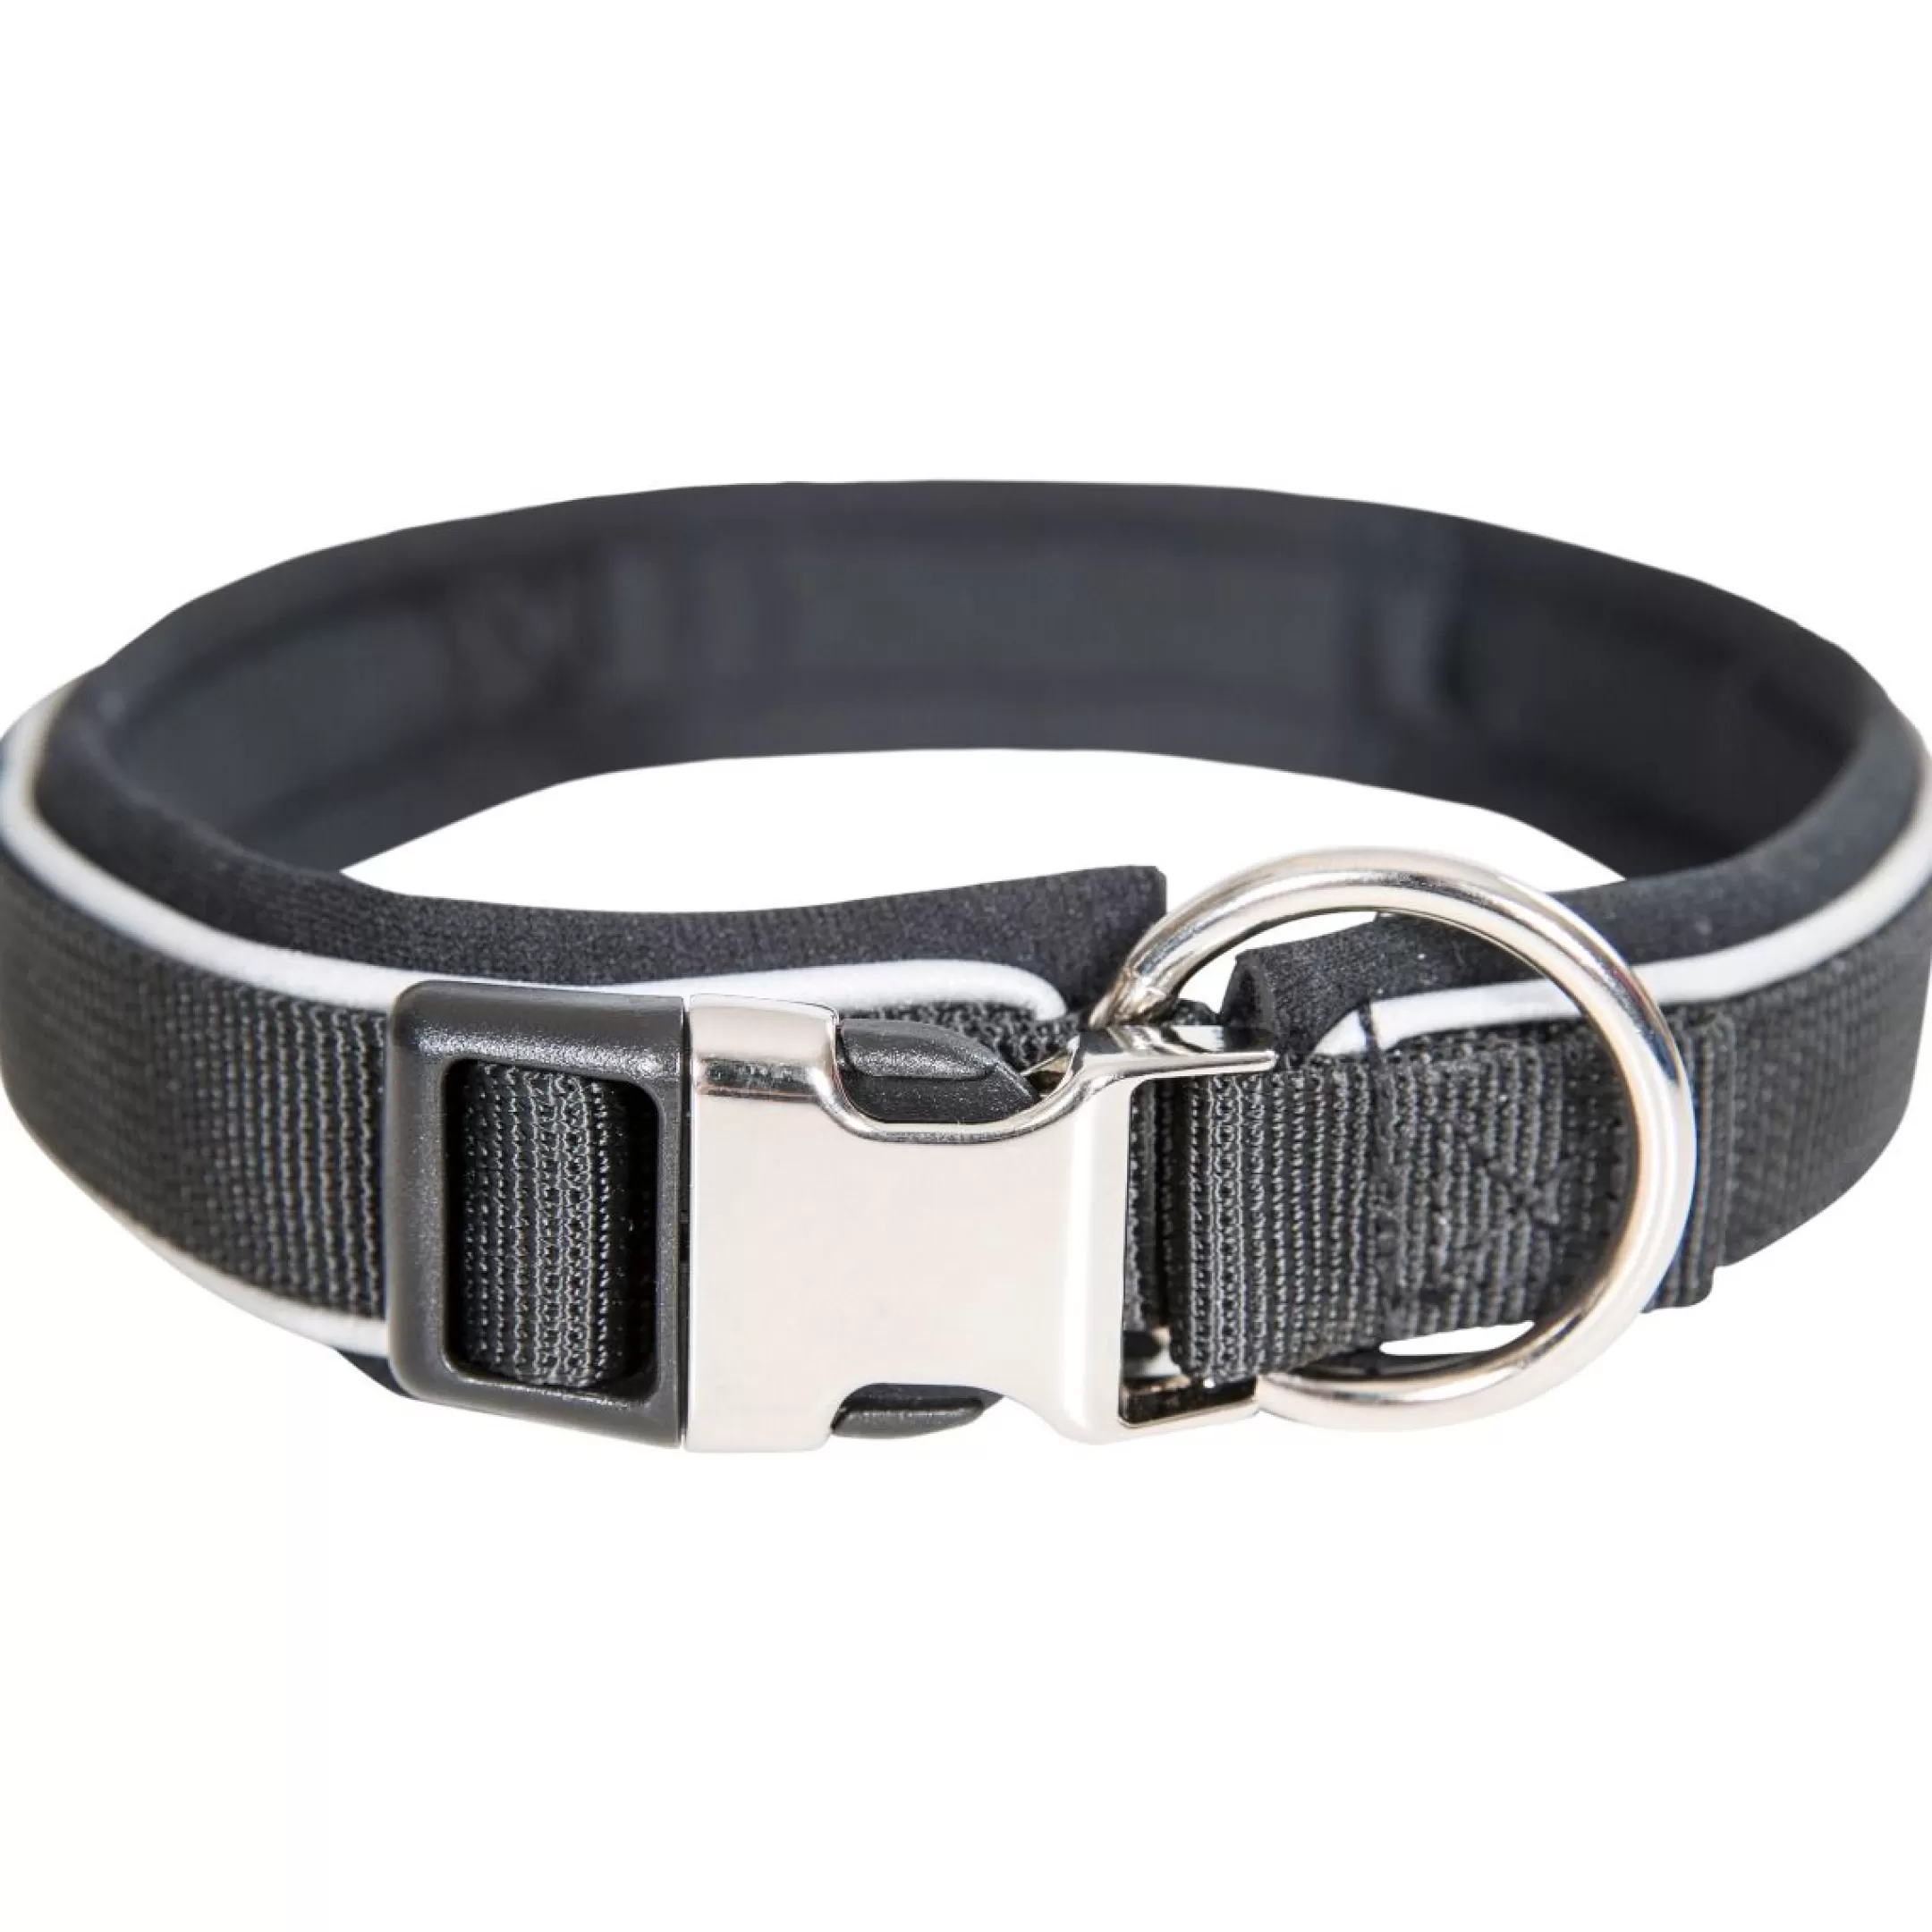 Trespaws Large Reflective Soft Touch Dog Collar in Black Keira | Trespass Flash Sale